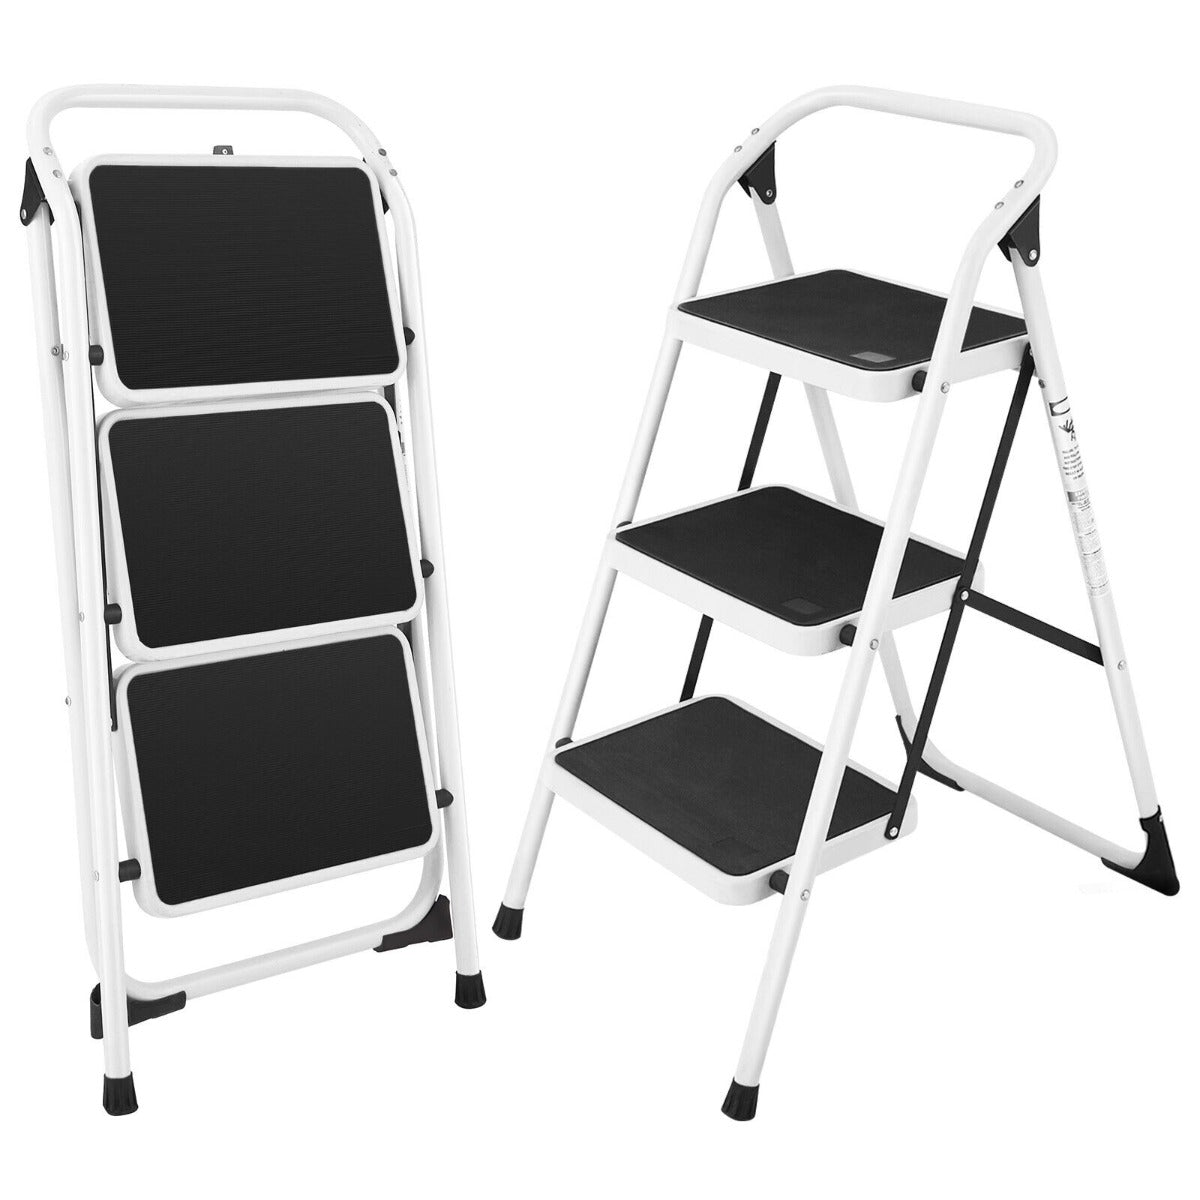 Step Ladder, 3 Step Ladder, Folding Step Ladder, Folding Portable Ladder with Platform and Safe Lock, Costway, 2